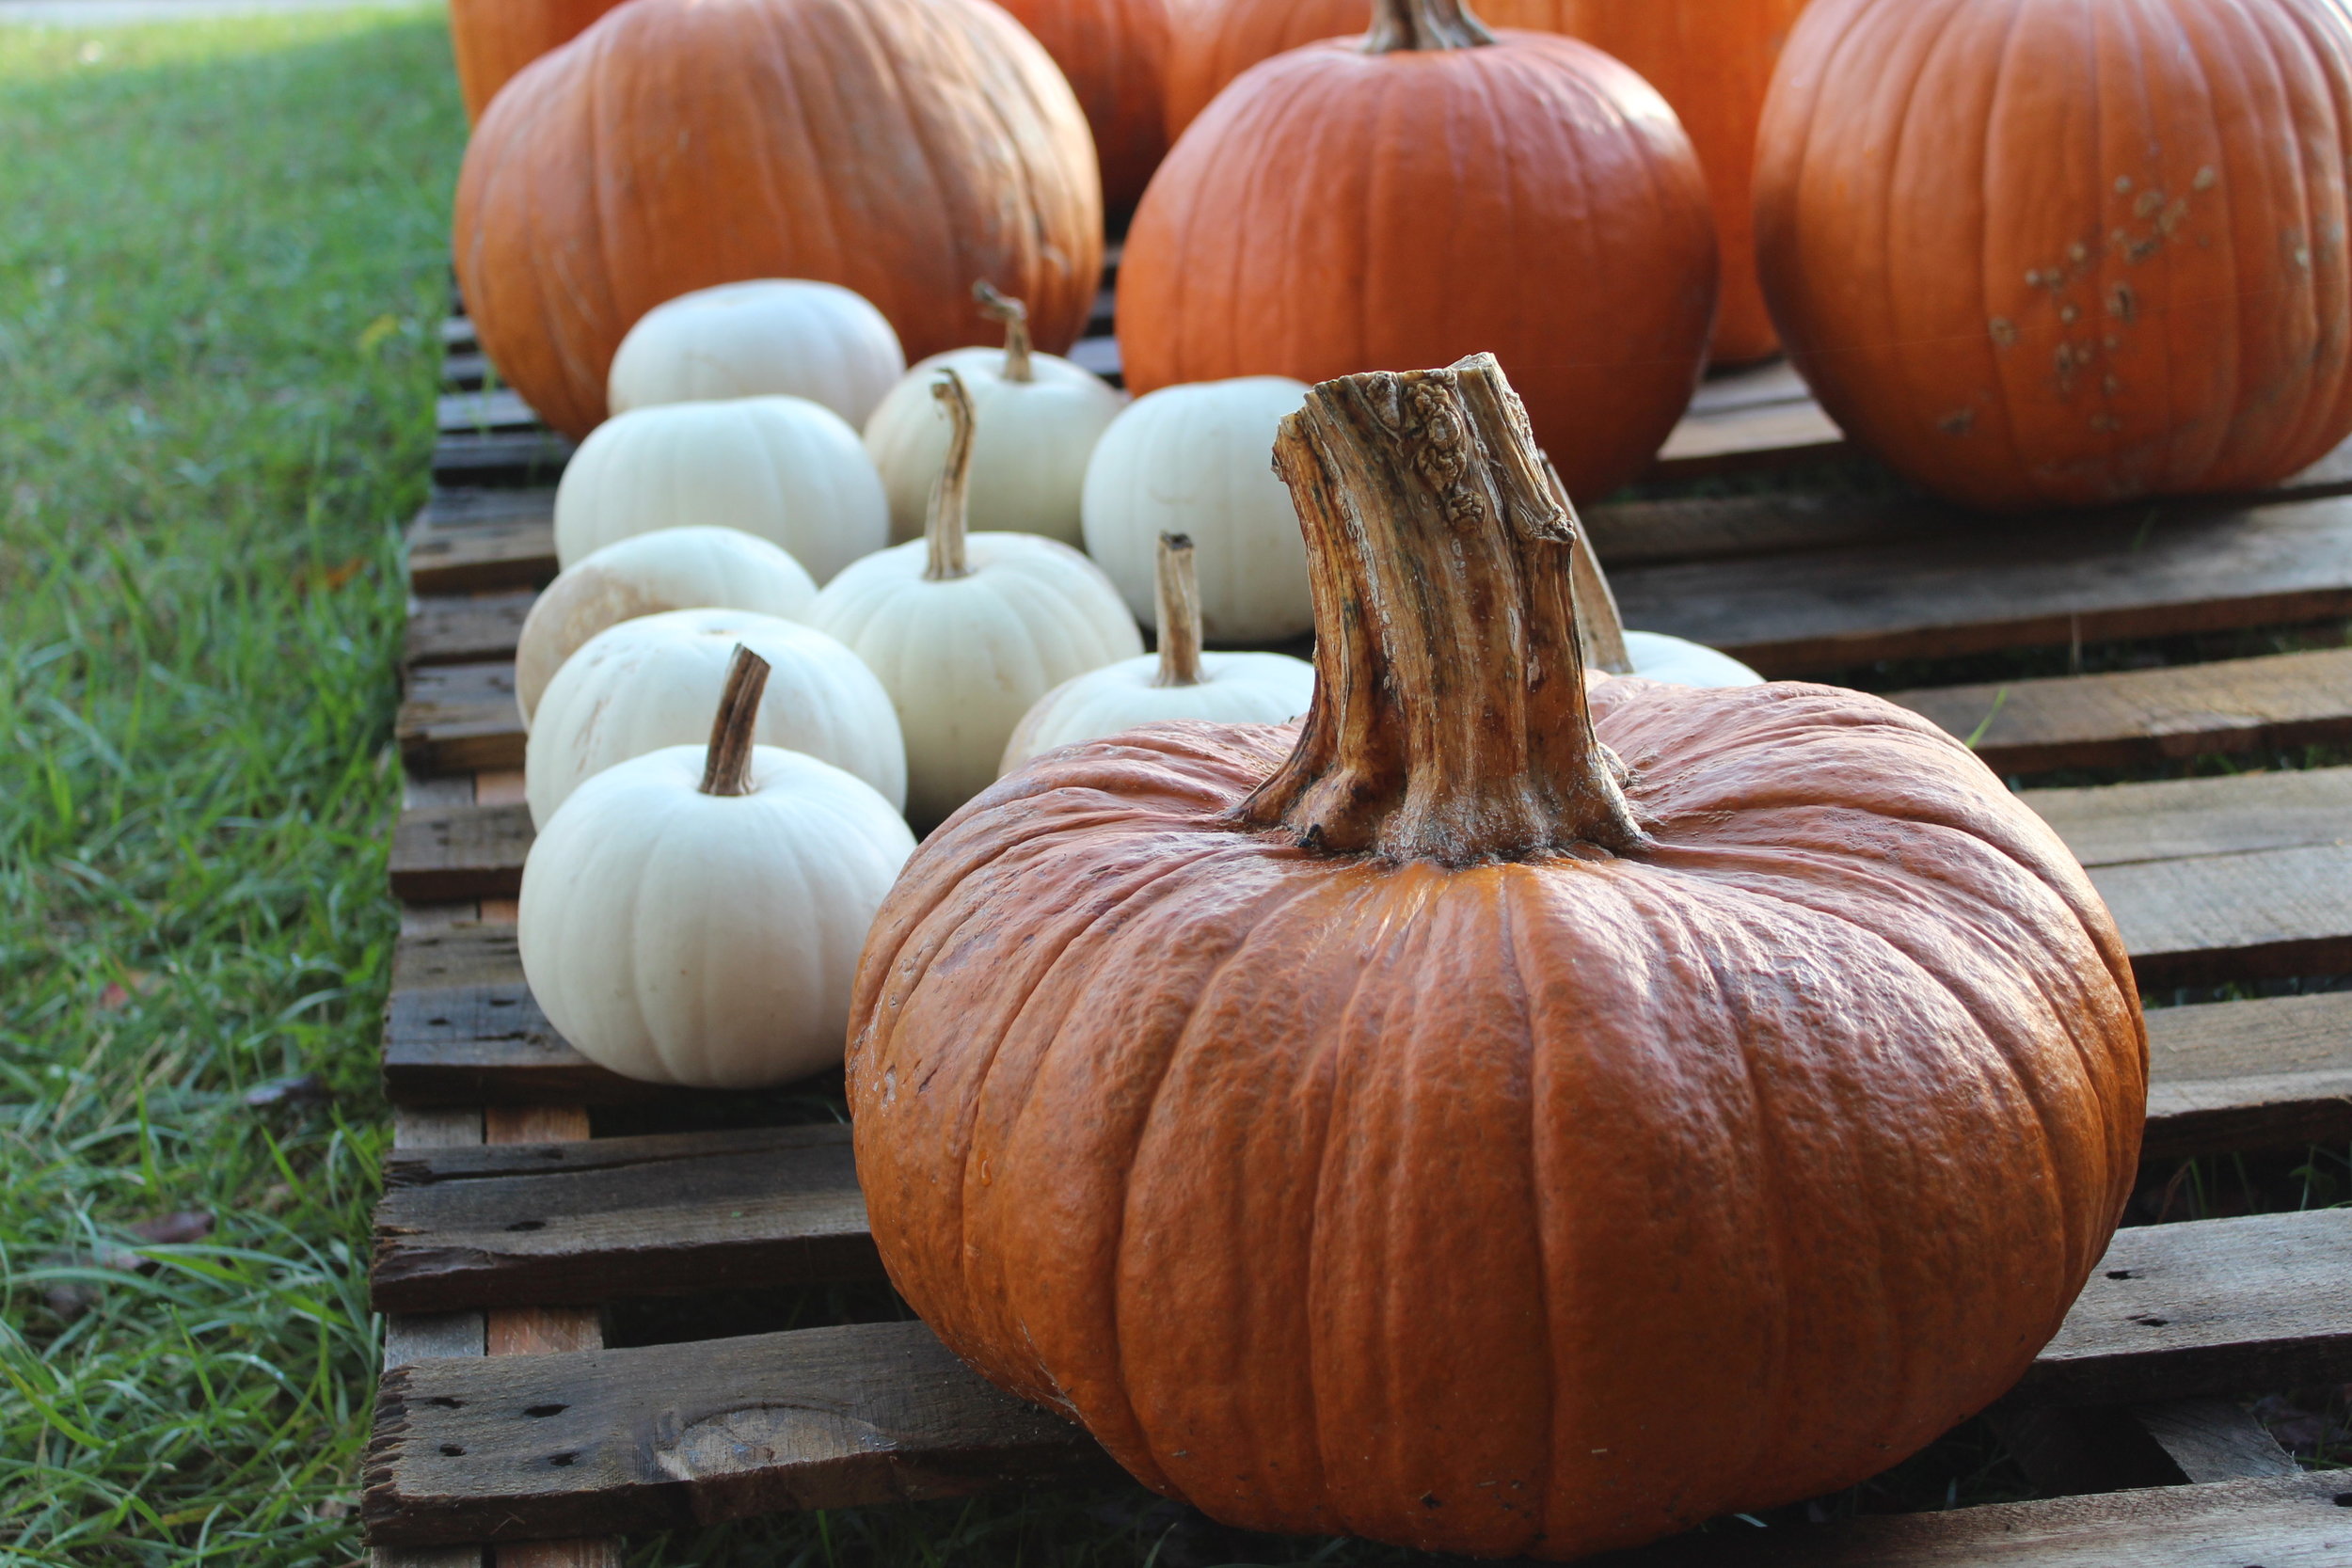 Fairy Tale pumpkins have deep ribs, mahogany color, and a thick stem. Great decor and good pies.